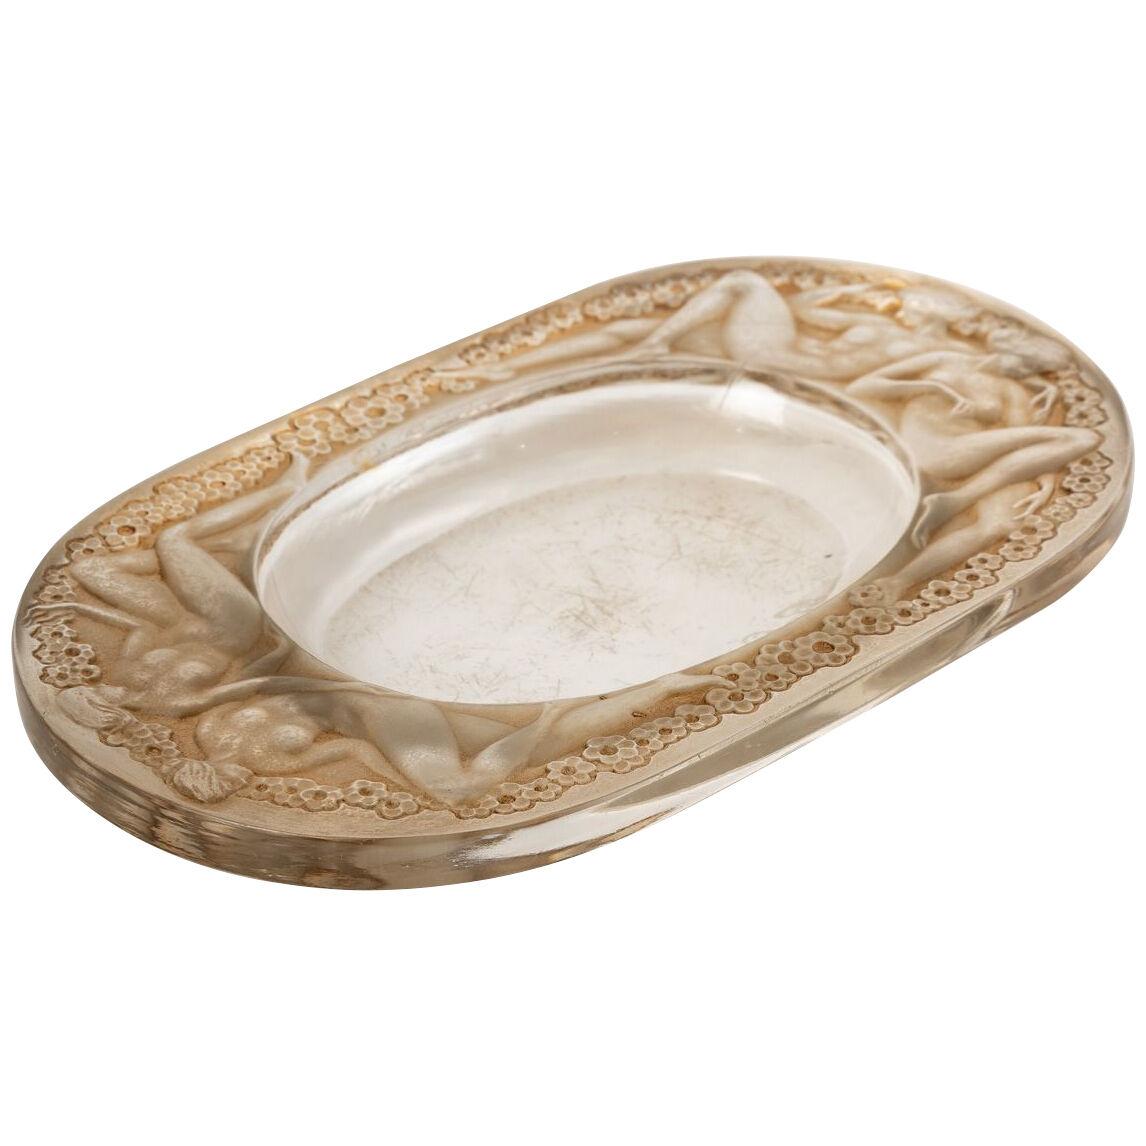 1924 René Lalique - Ashtray Medicis Frosted Glass With Sepia Patina